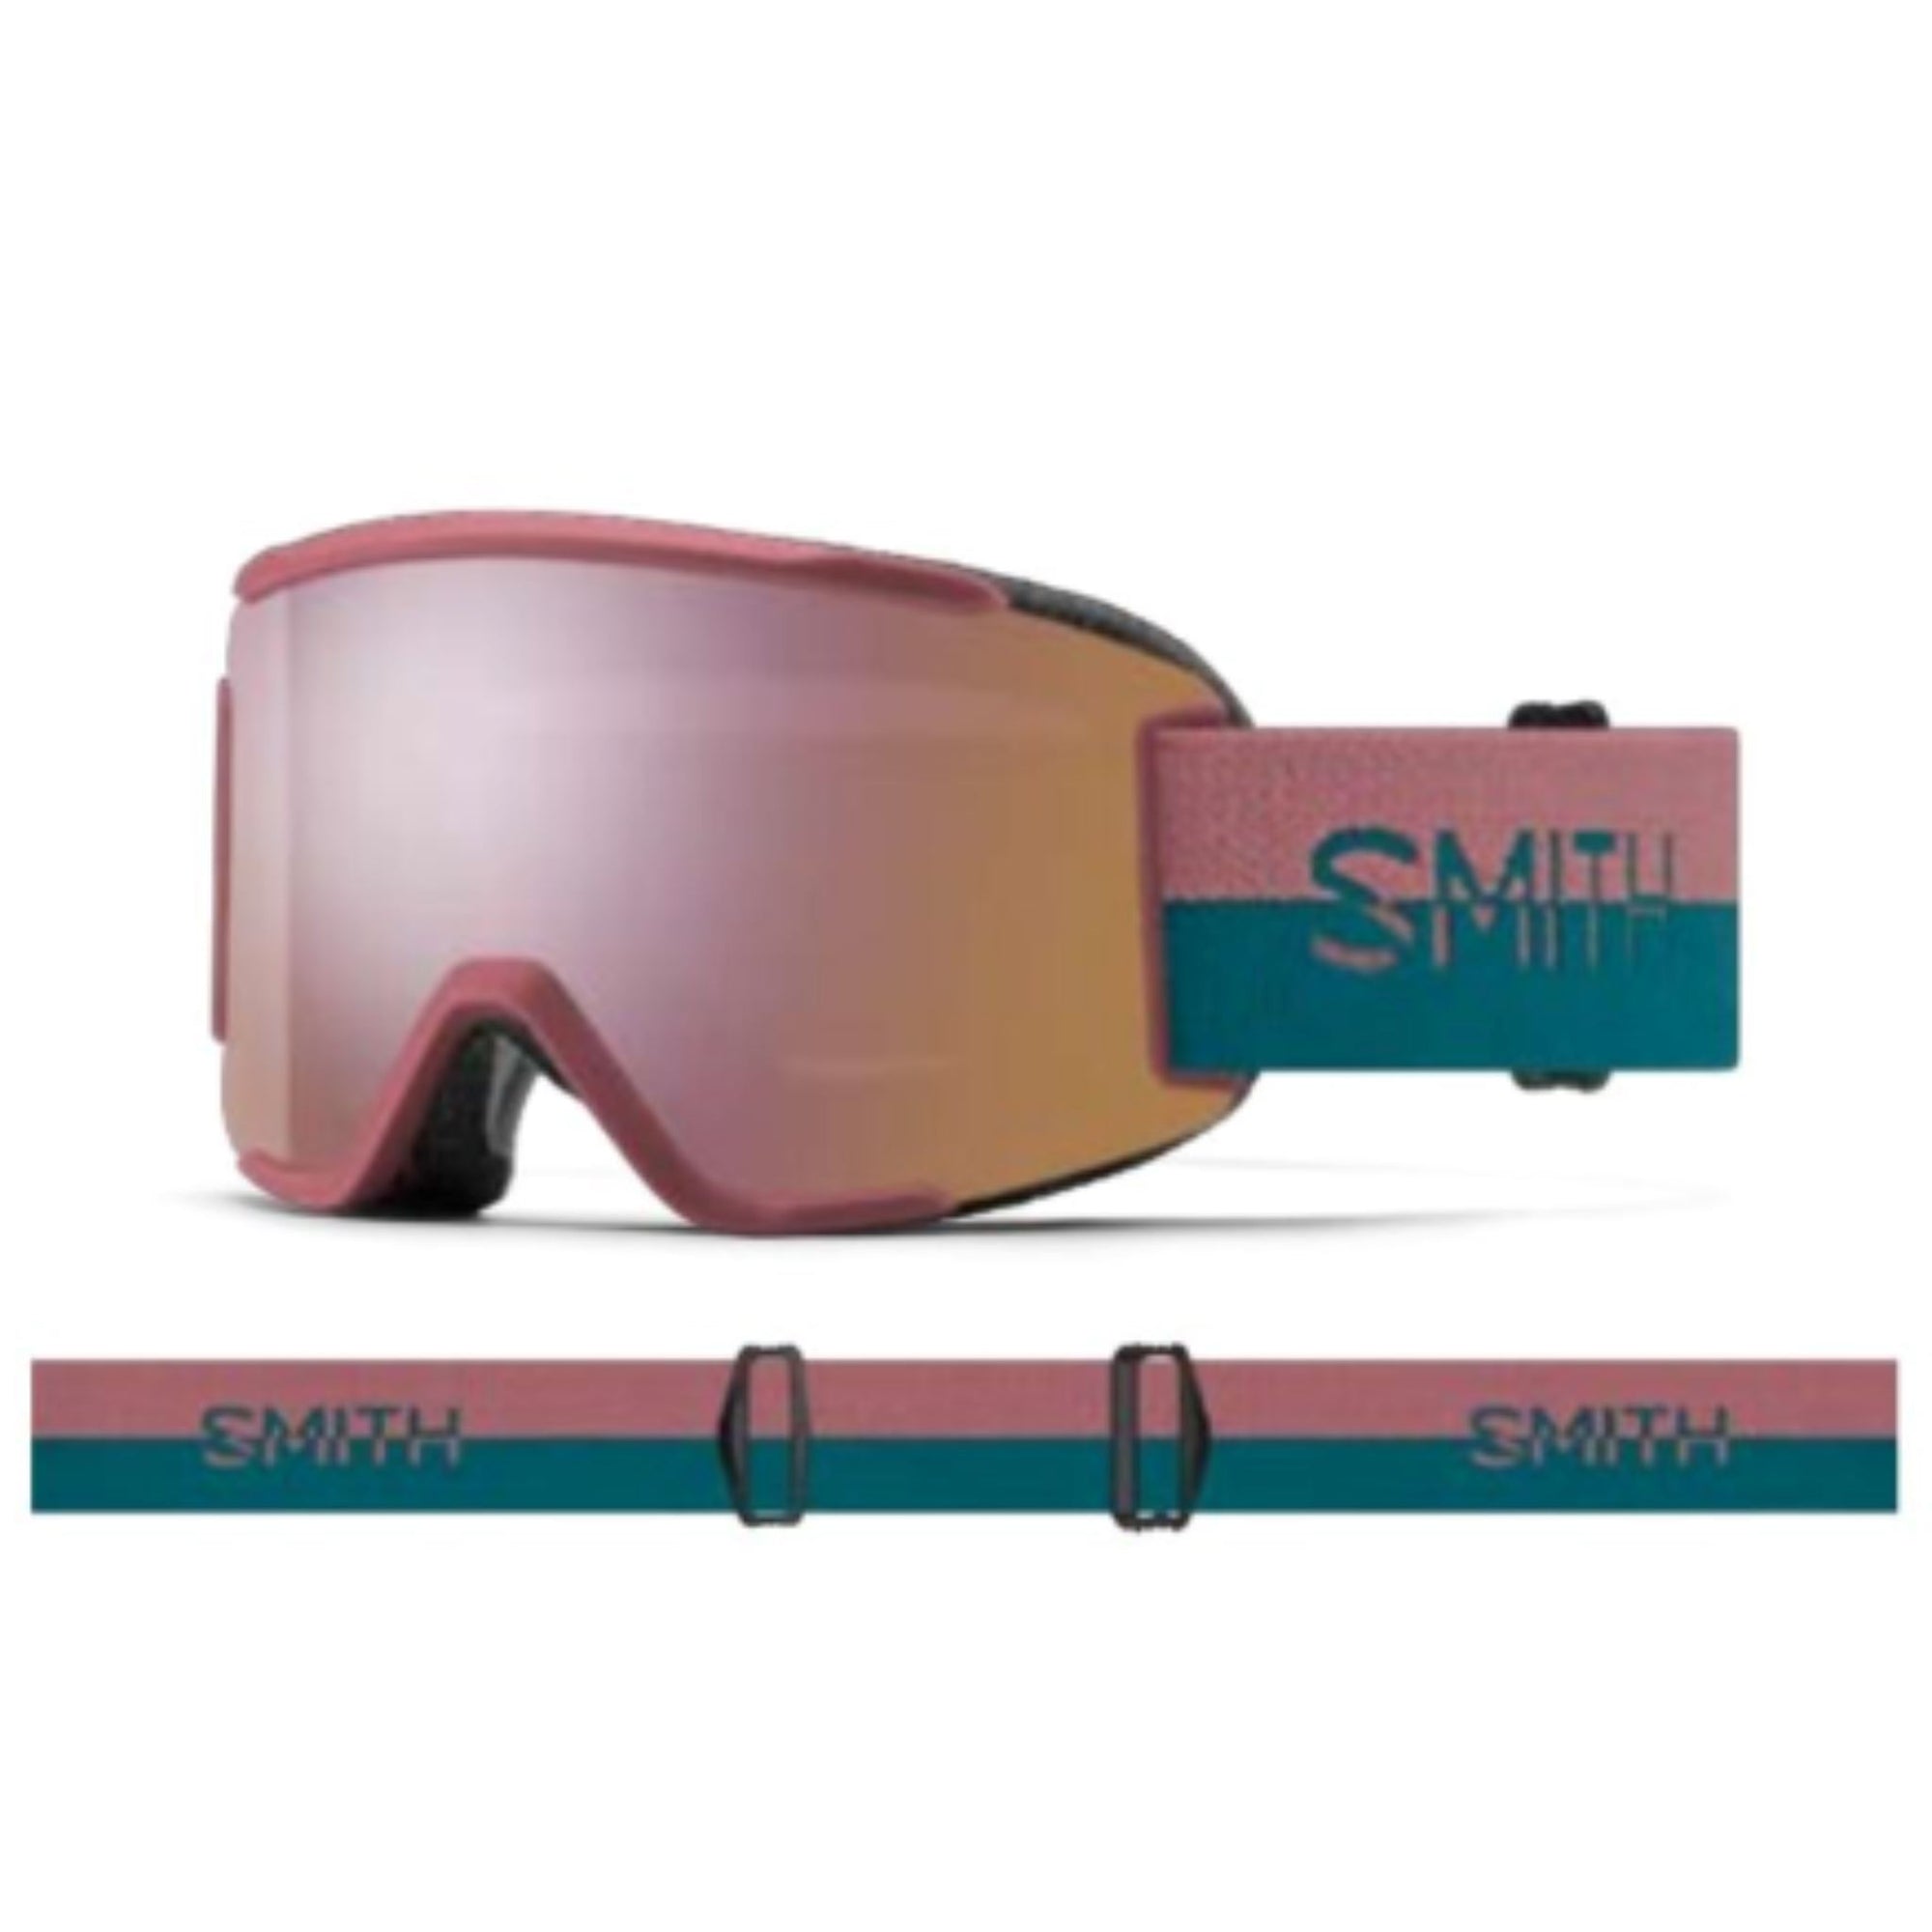 Smith Squad S Goggles (Small Fit) - Chalk Rose Split ChromaPop Everyday Rose Gold Mirror Goggles Smith 